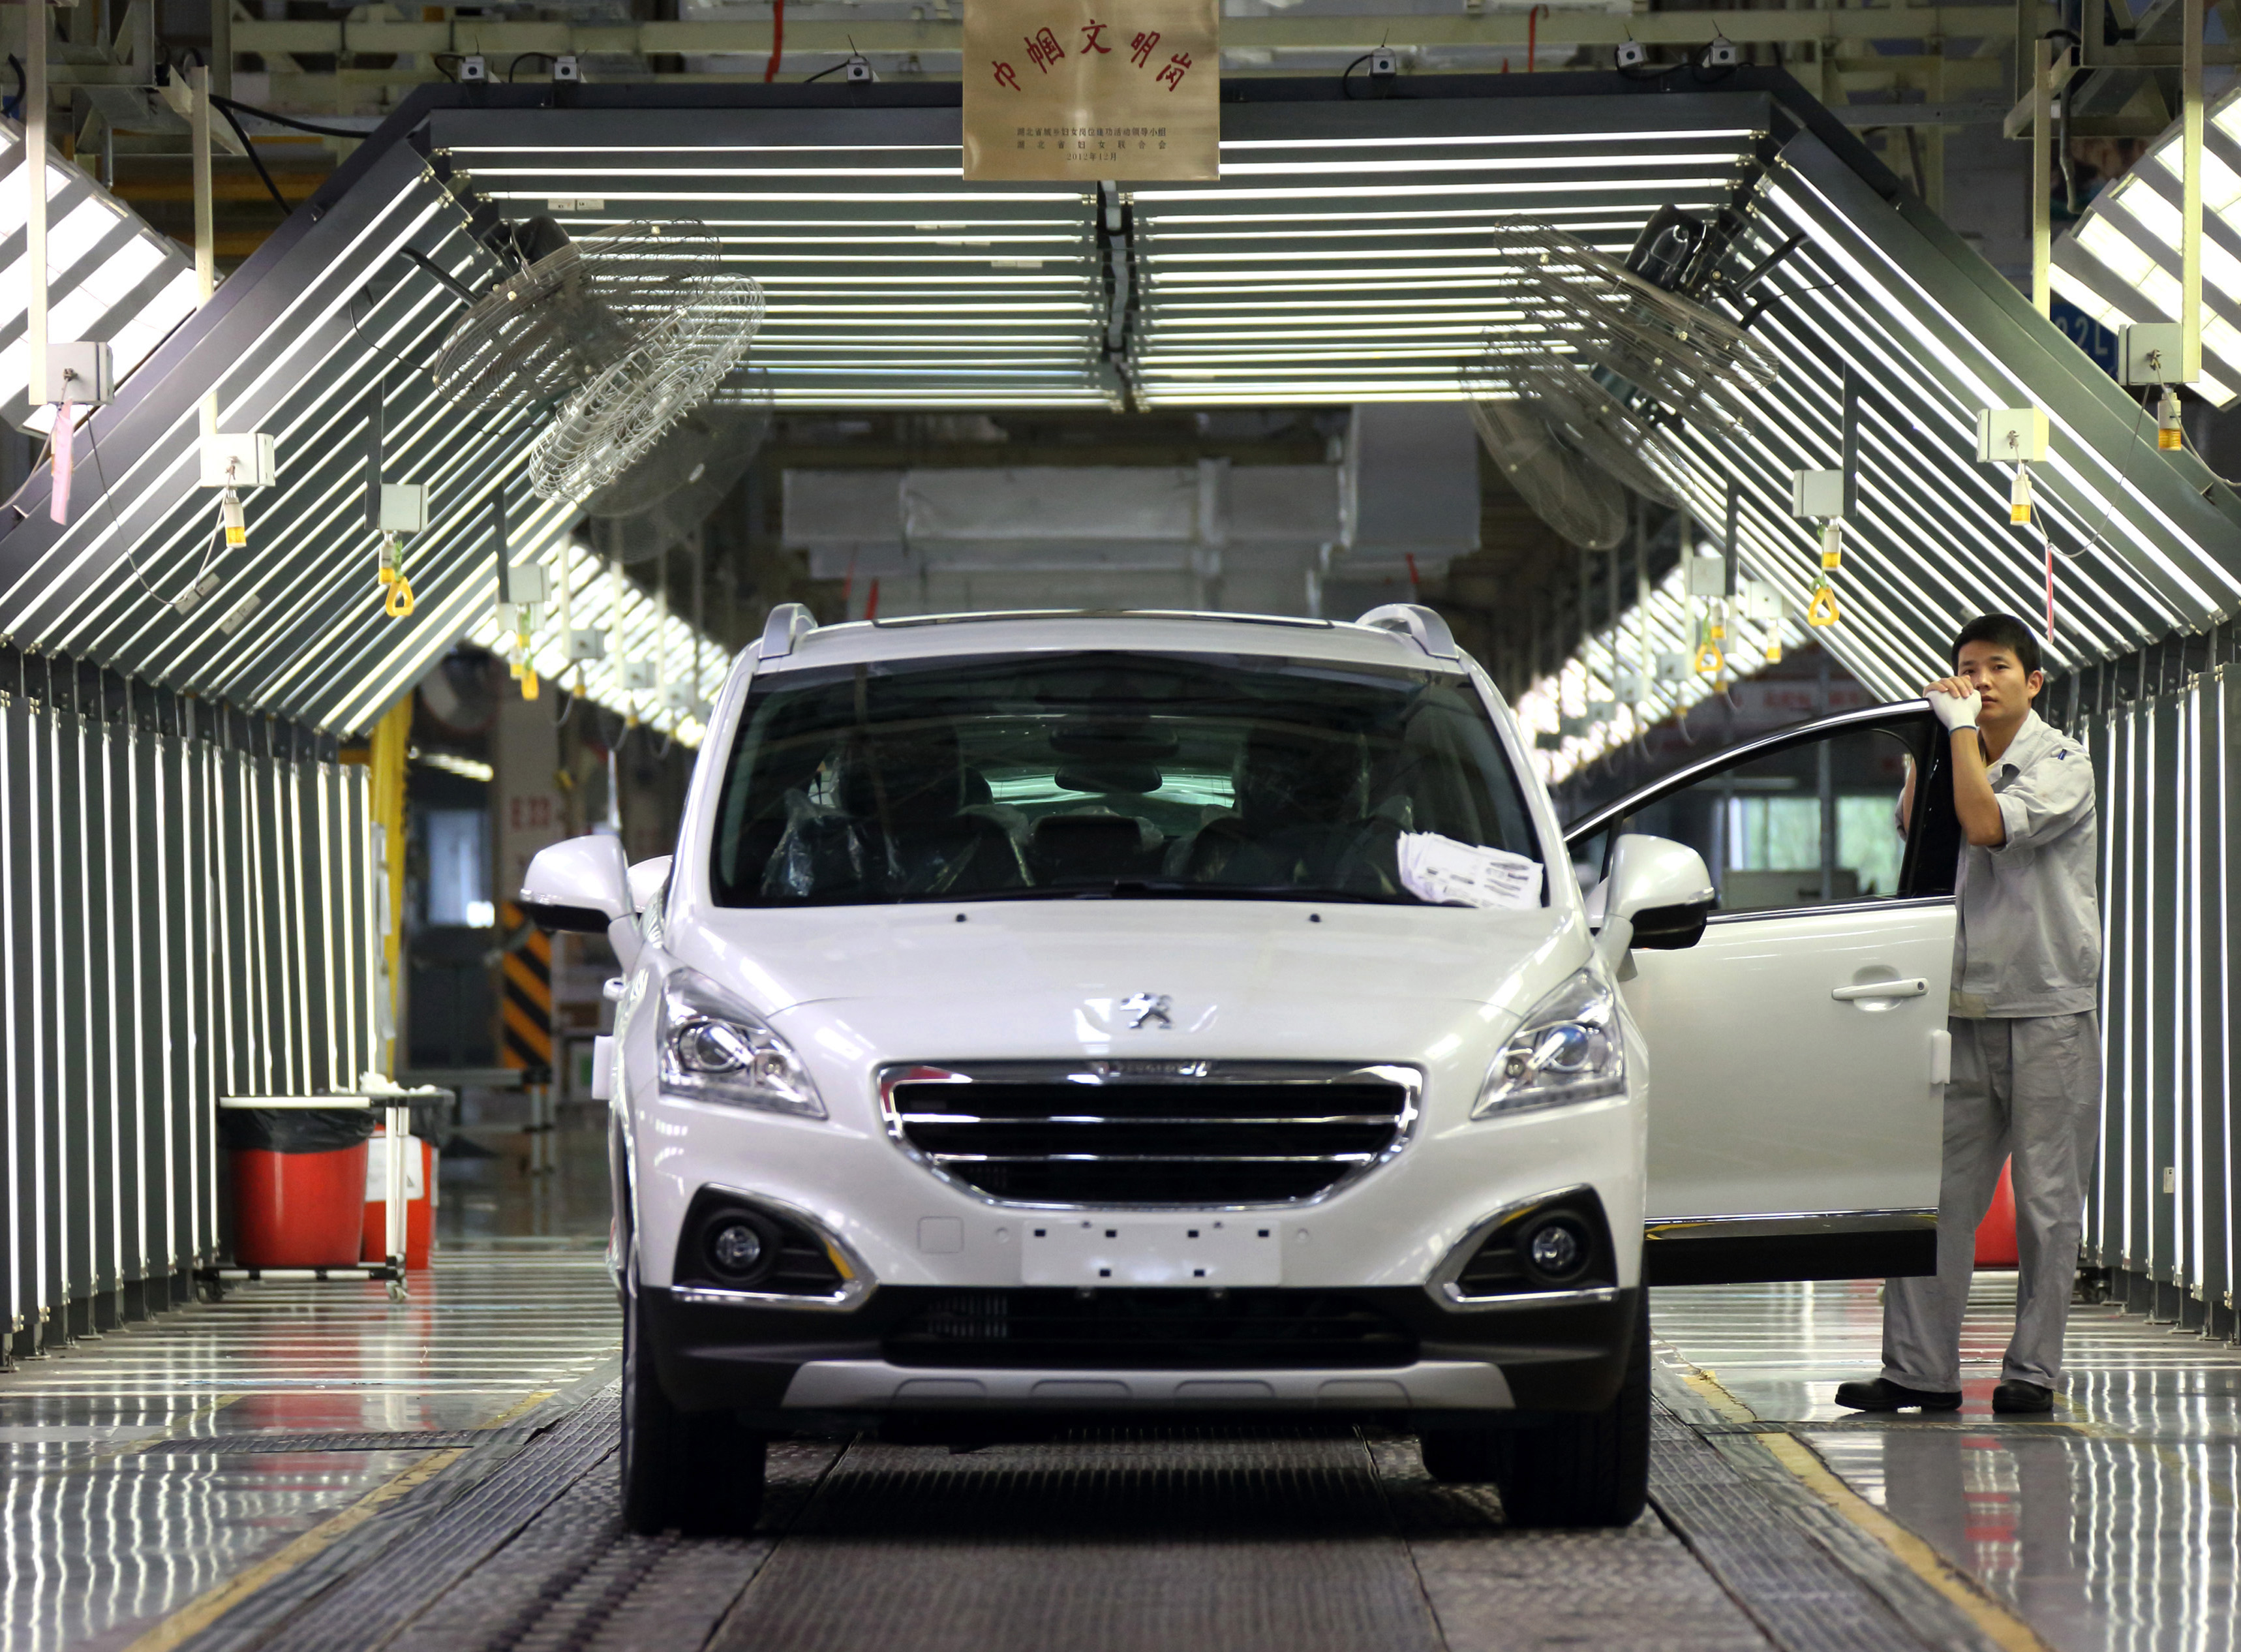 A worker stands next to a Peugeot 3008 compact sport-utility vehicle (SUV) during final inspections on the production line at a plant operated by Dongfeng Peugeot-Citroen Automobile Ltd., the joint venture between Dongfeng Motor Corp. and PSA Peugeot Citroen, in Wuhan, China, on Wednesday, Oct. 16, 2013. PSA Peugeot Citroen is considering stake sales to Dongfeng Motor Corp. and the French government to shore up funding as car sales in Europe plunge to a 20-year low, people familiar with the matter said on Oct. 14. Photographer: Tomohiro Ohsumi/Bloomberg